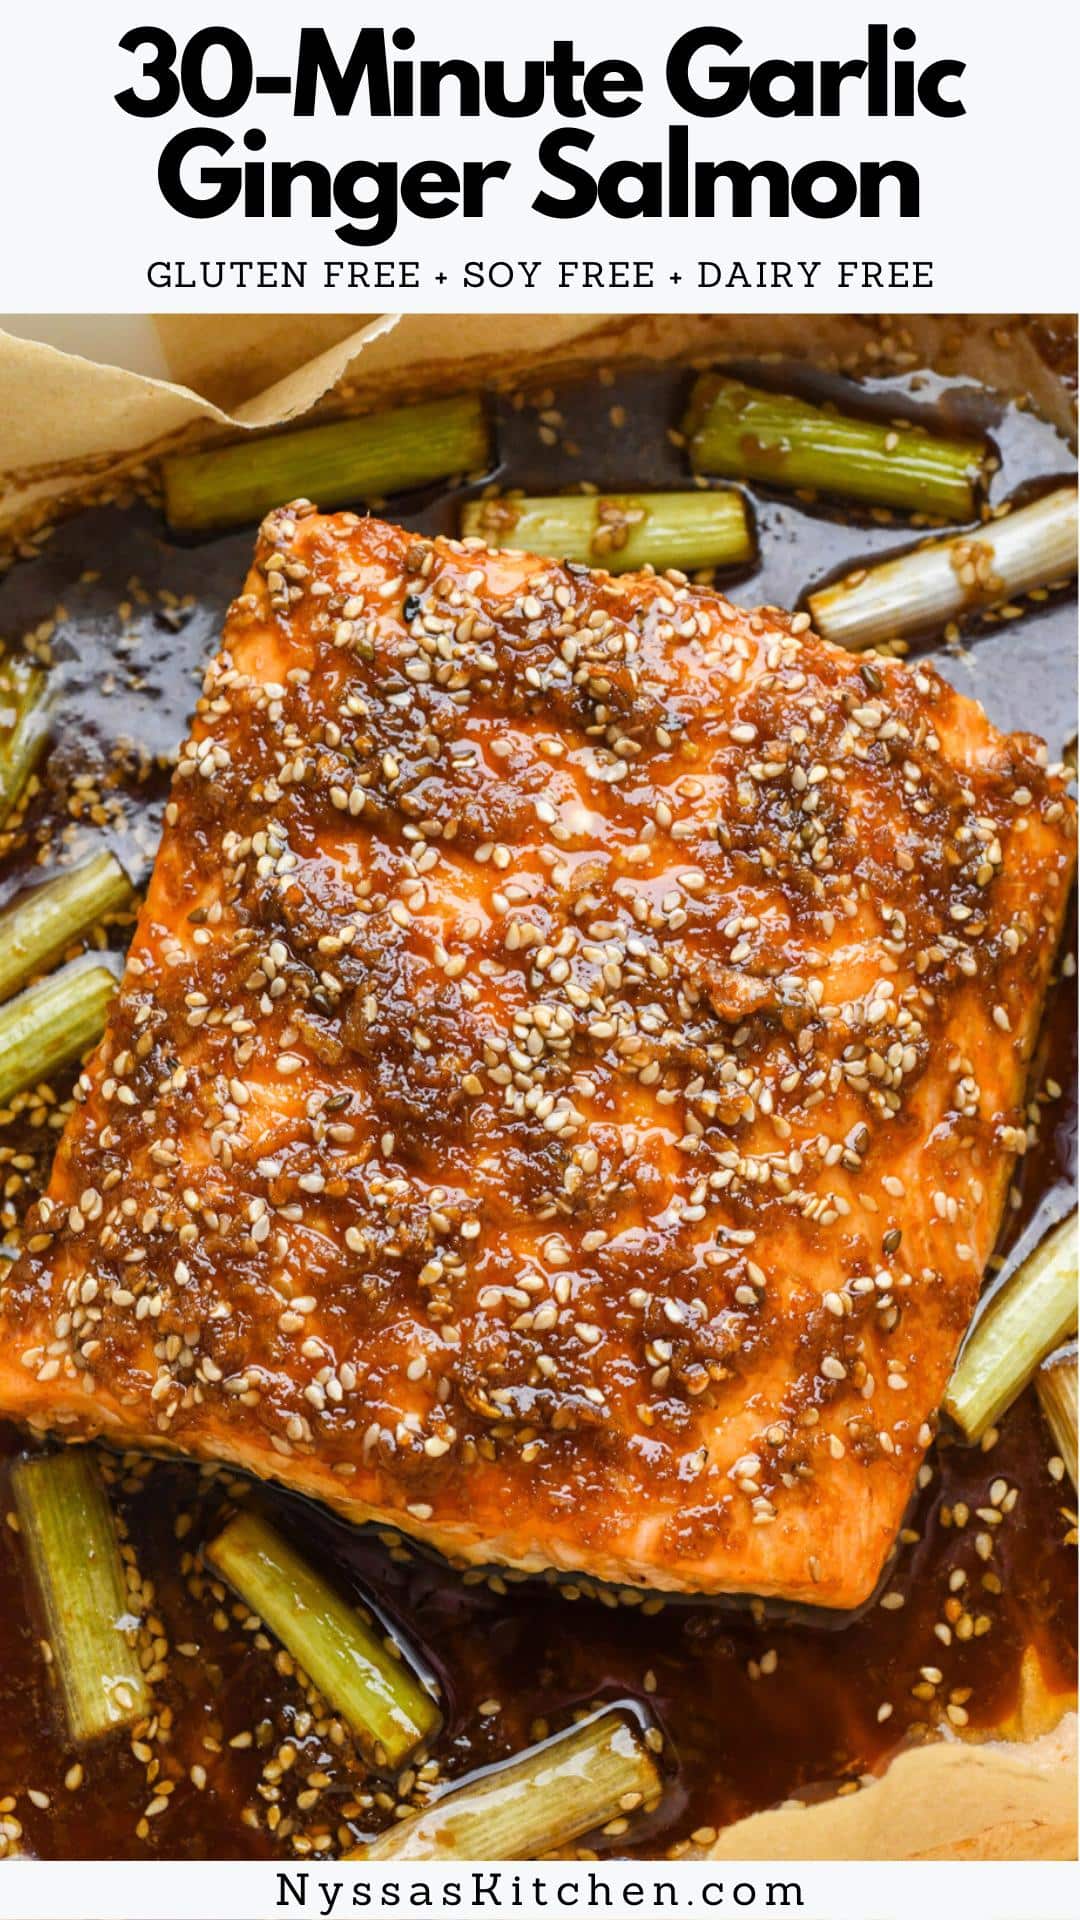 This 30-minute garlic ginger glazed salmon is the new easy salmon recipe you need in your weekly meal rotation! It comes together quickly (no marinade time!) and is made with just a handful of pantry staples. The recipe makes two servings but can easily be doubled to serve four. Gluten free, soy free, and naturally sweetened with a bit of honey!